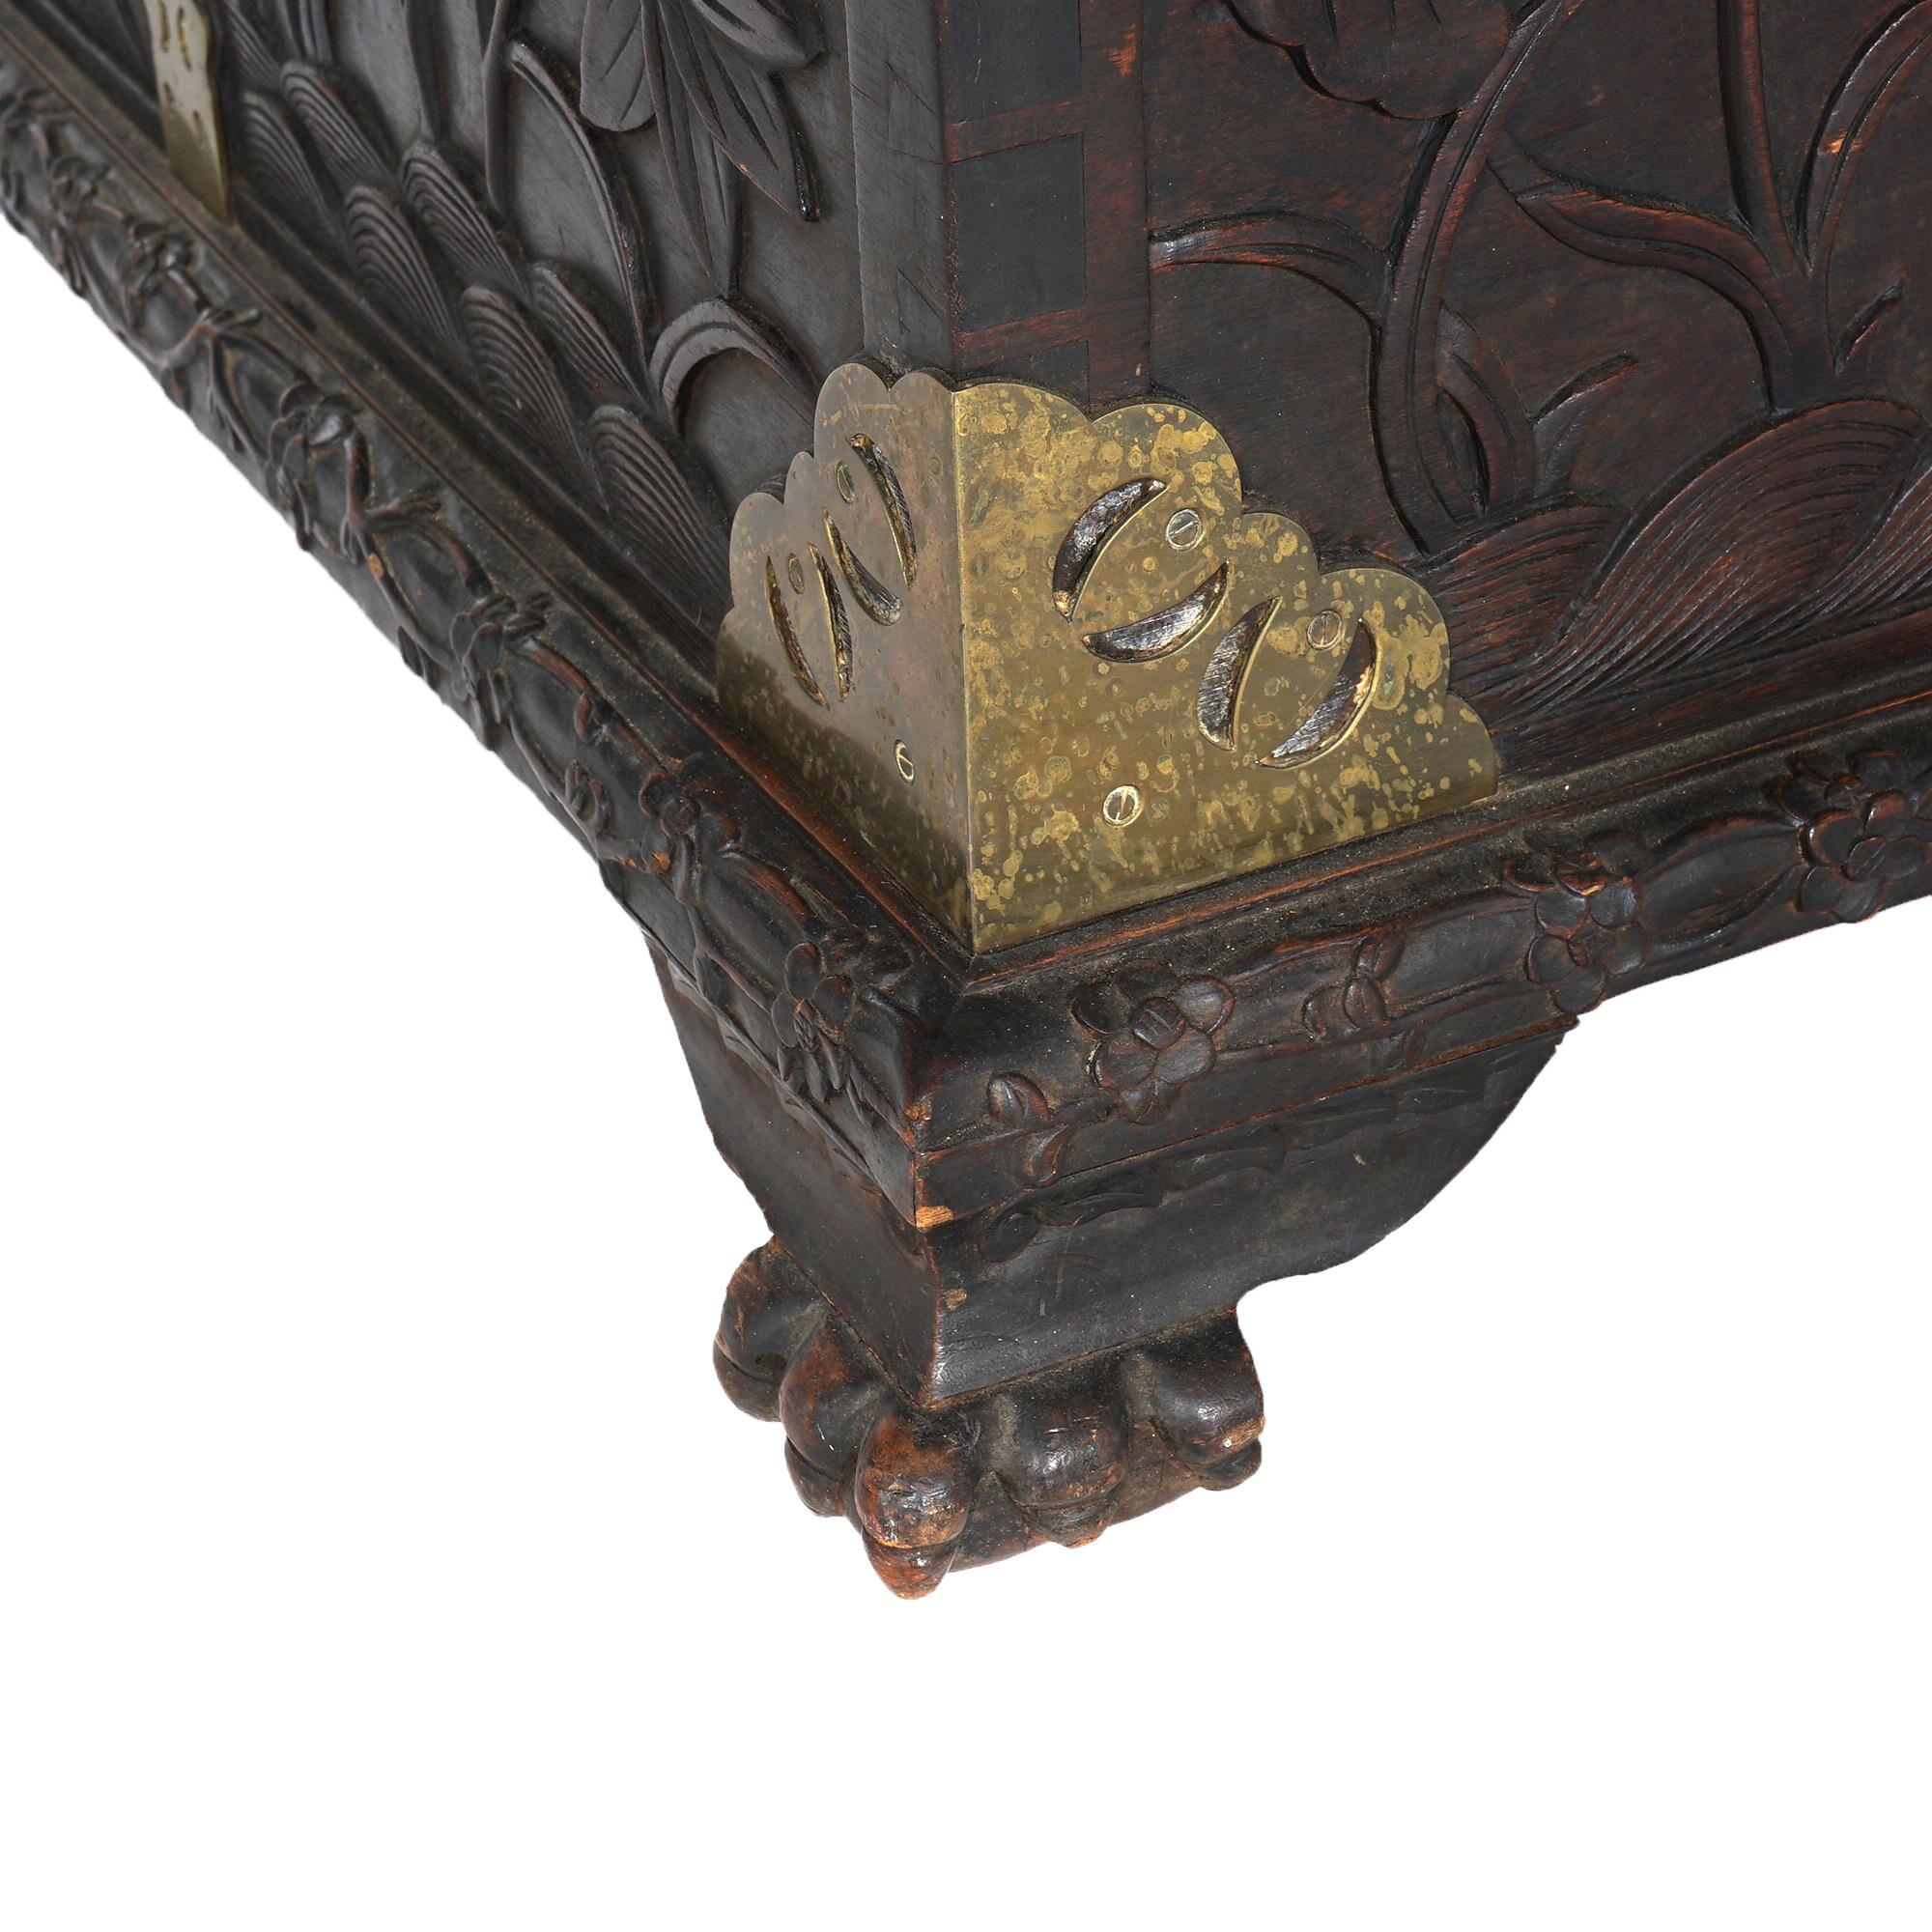 Antique Chinese Blanket Wedding Chest Carved in Relief with Floral Design C1890 For Sale 13